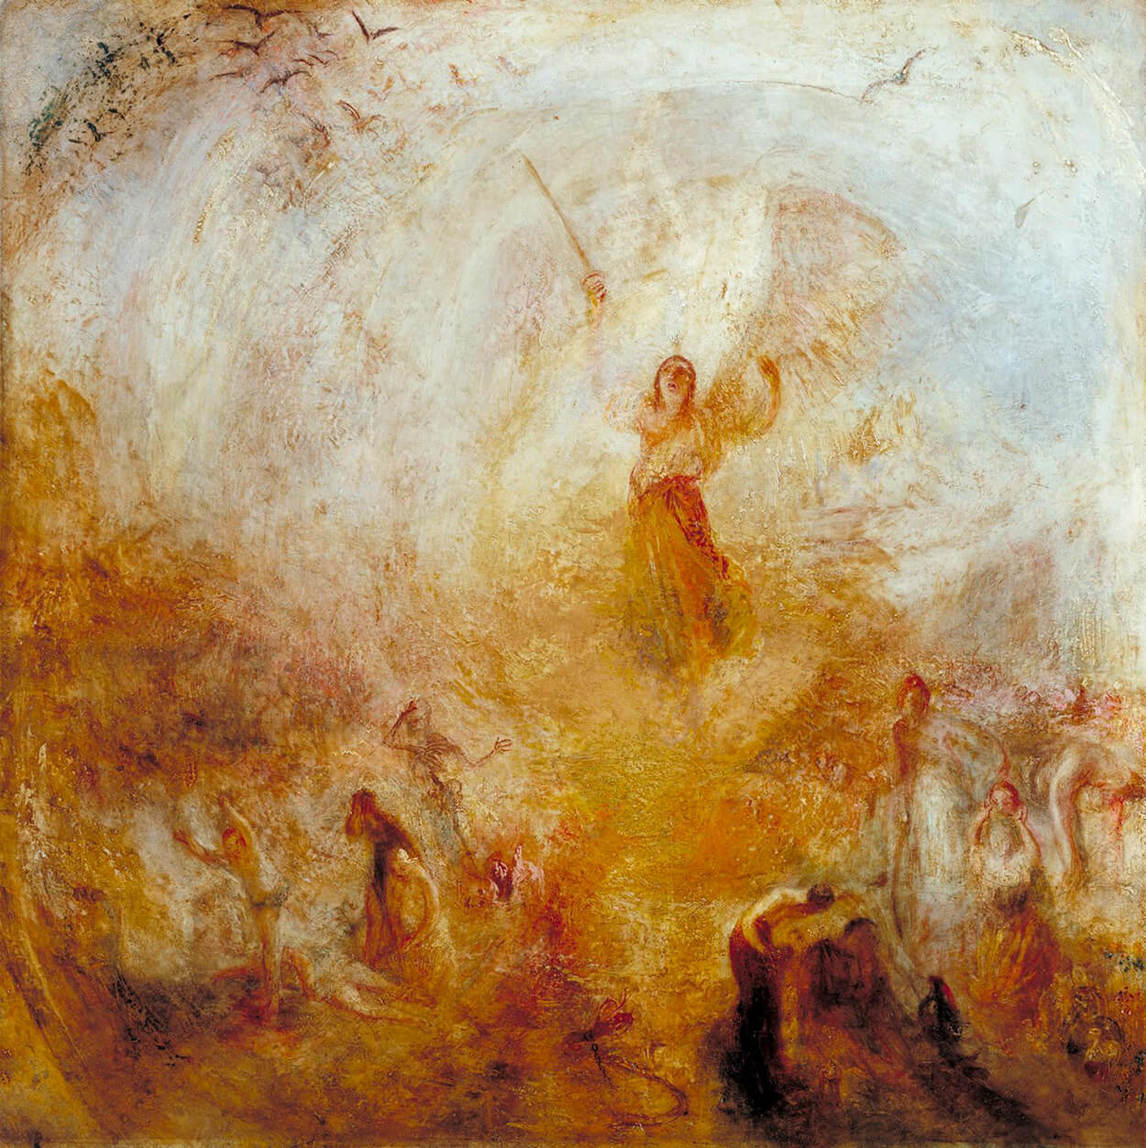 The Angel Standing in the Sun, c. 1846, by J.M.W. Turner